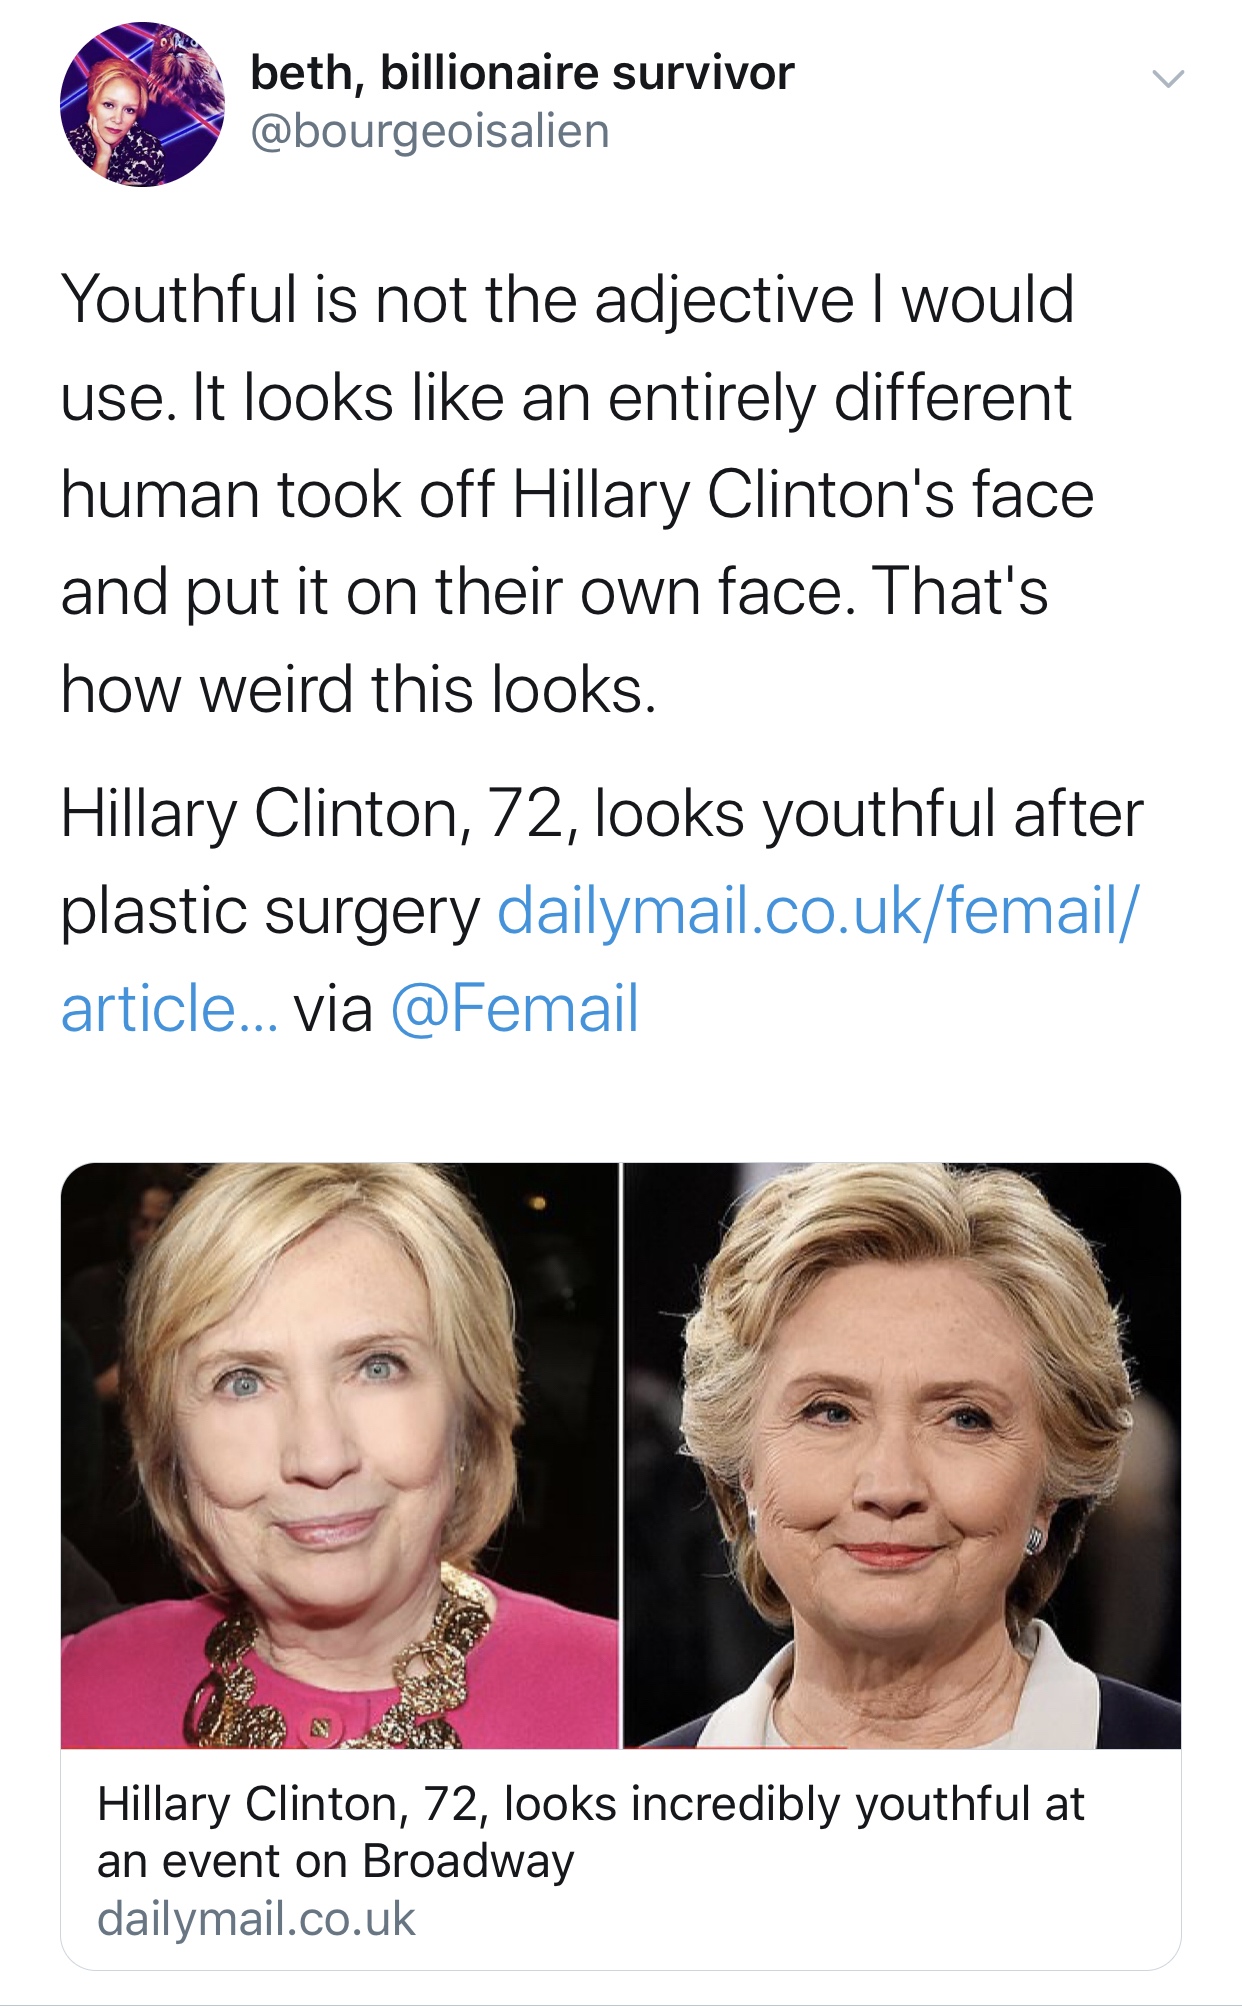 beauty - beth, billionaire survivor Youthful is not the adjective I would use. It looks an entirely different human took off Hillary Clinton's face and put it on their own face. That's how weird this looks. Hillary Clinton, 72, looks youthful after plasti